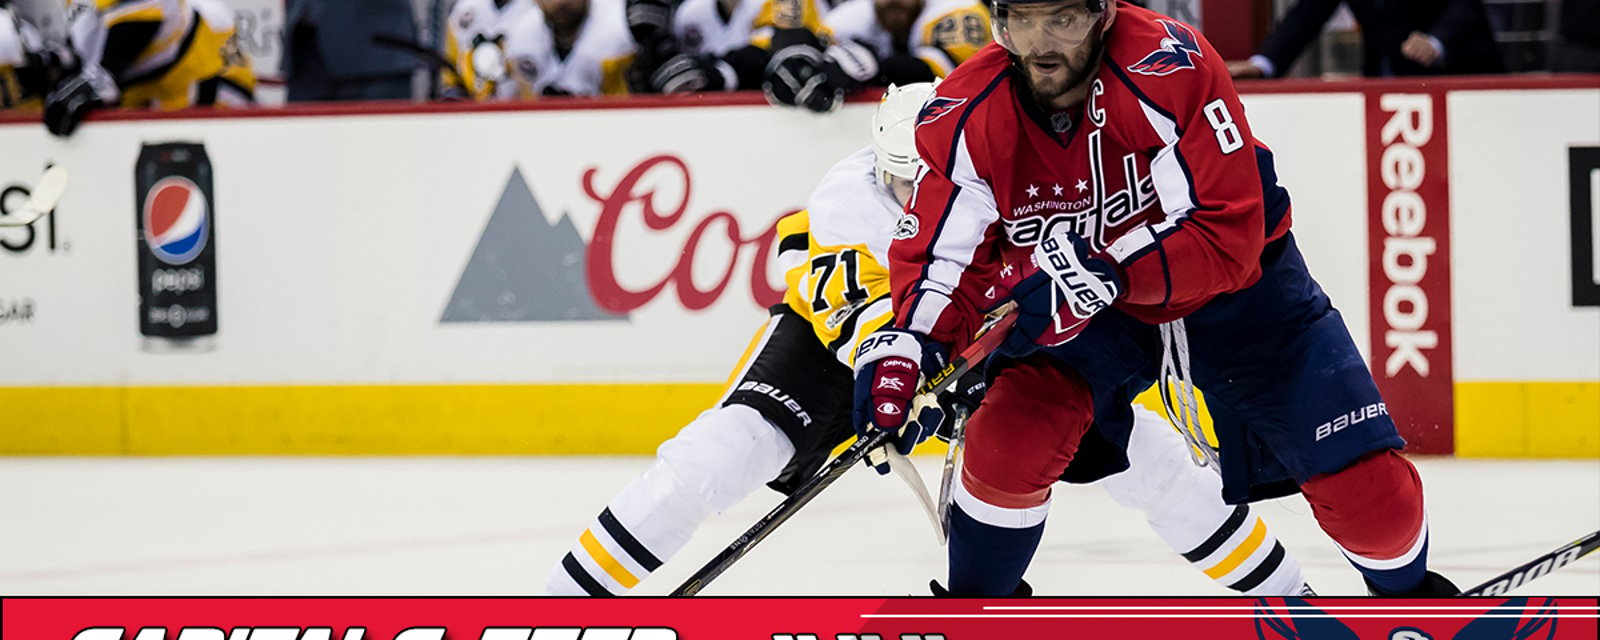 NHL GM linked to Ovechkin trade speaks out